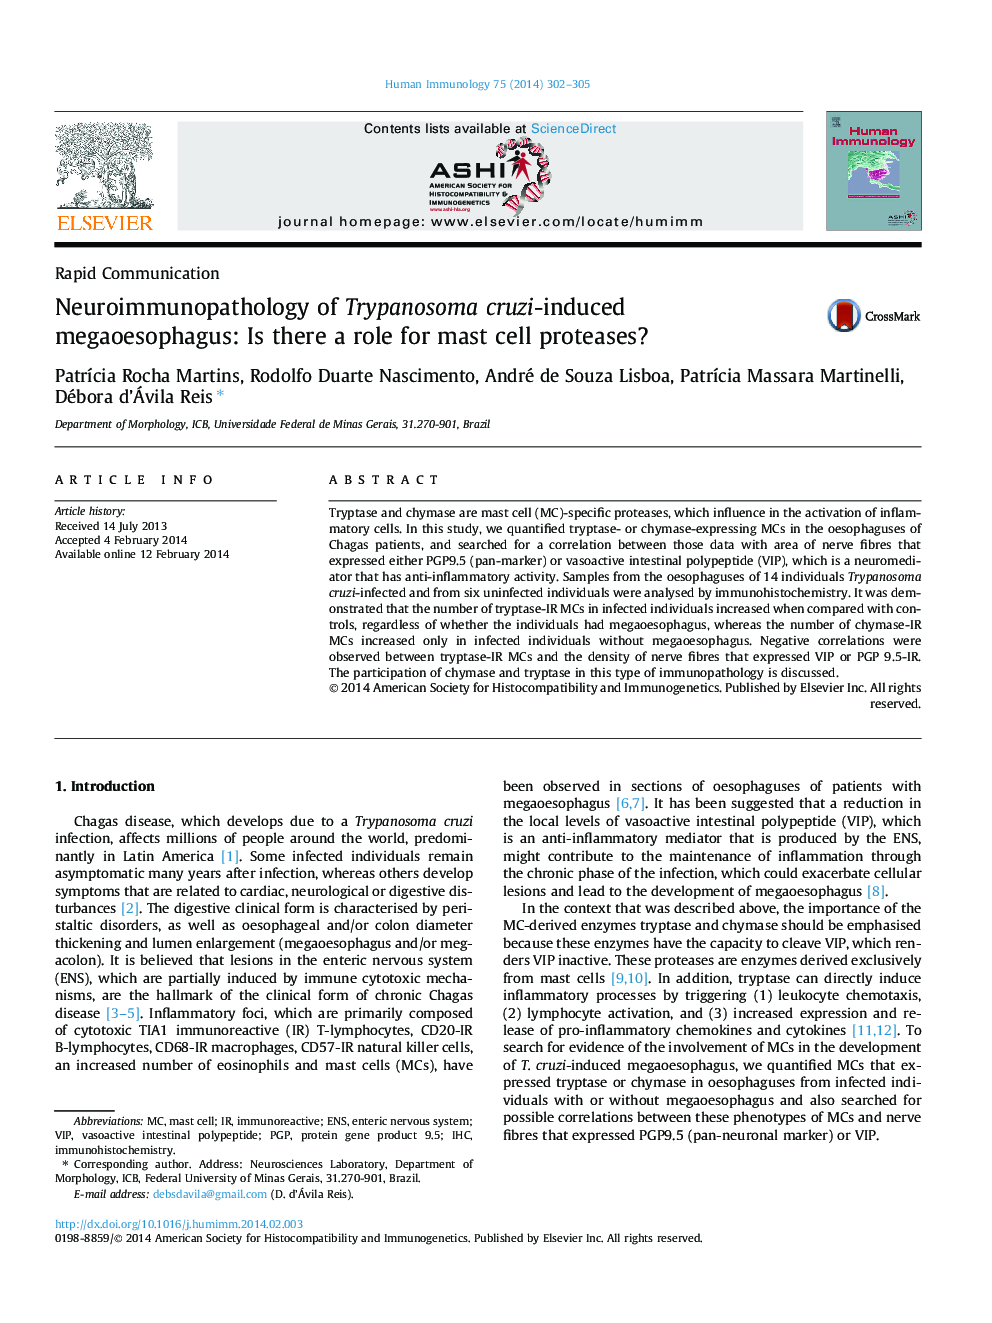 Neuroimmunopathology of Trypanosoma cruzi-induced megaoesophagus: Is there a role for mast cell proteases?